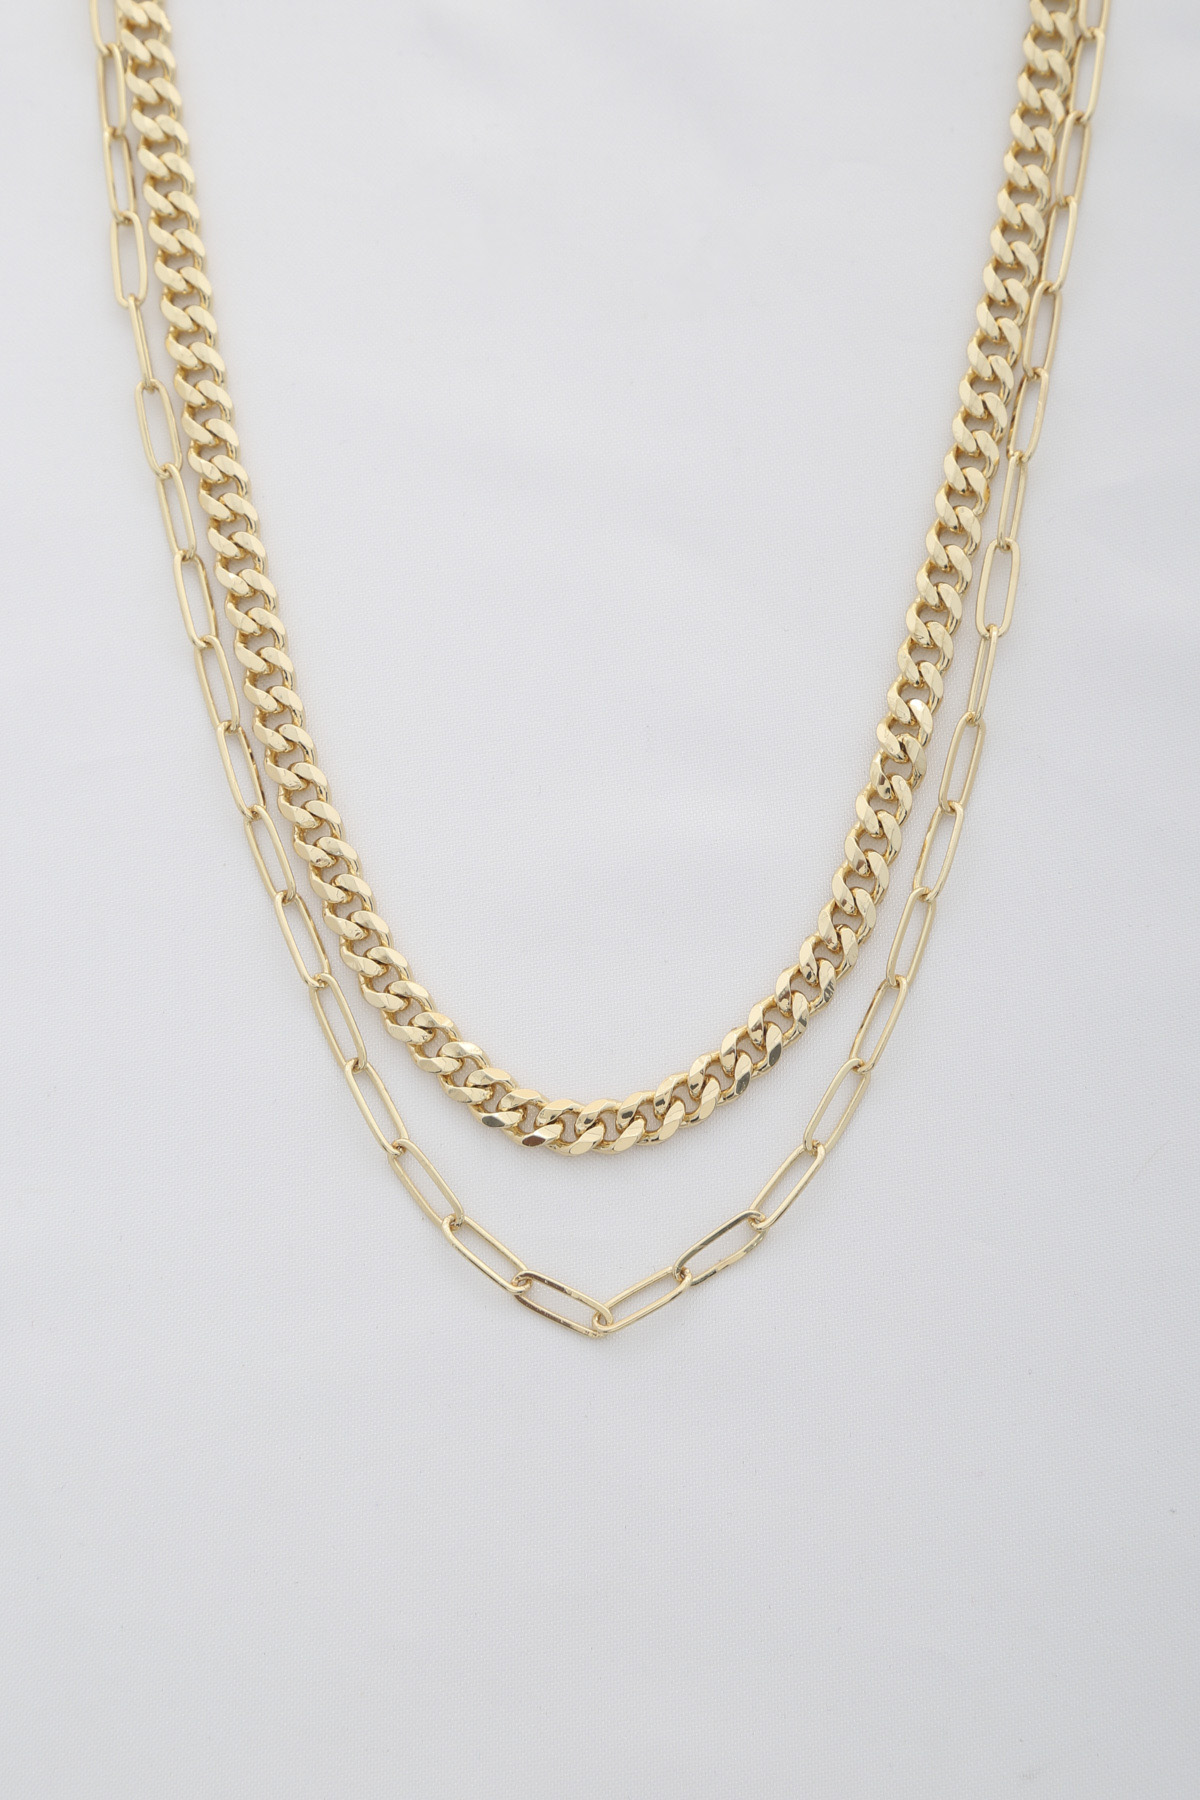 CURB OVAL LINK LAYERED NECKLACE